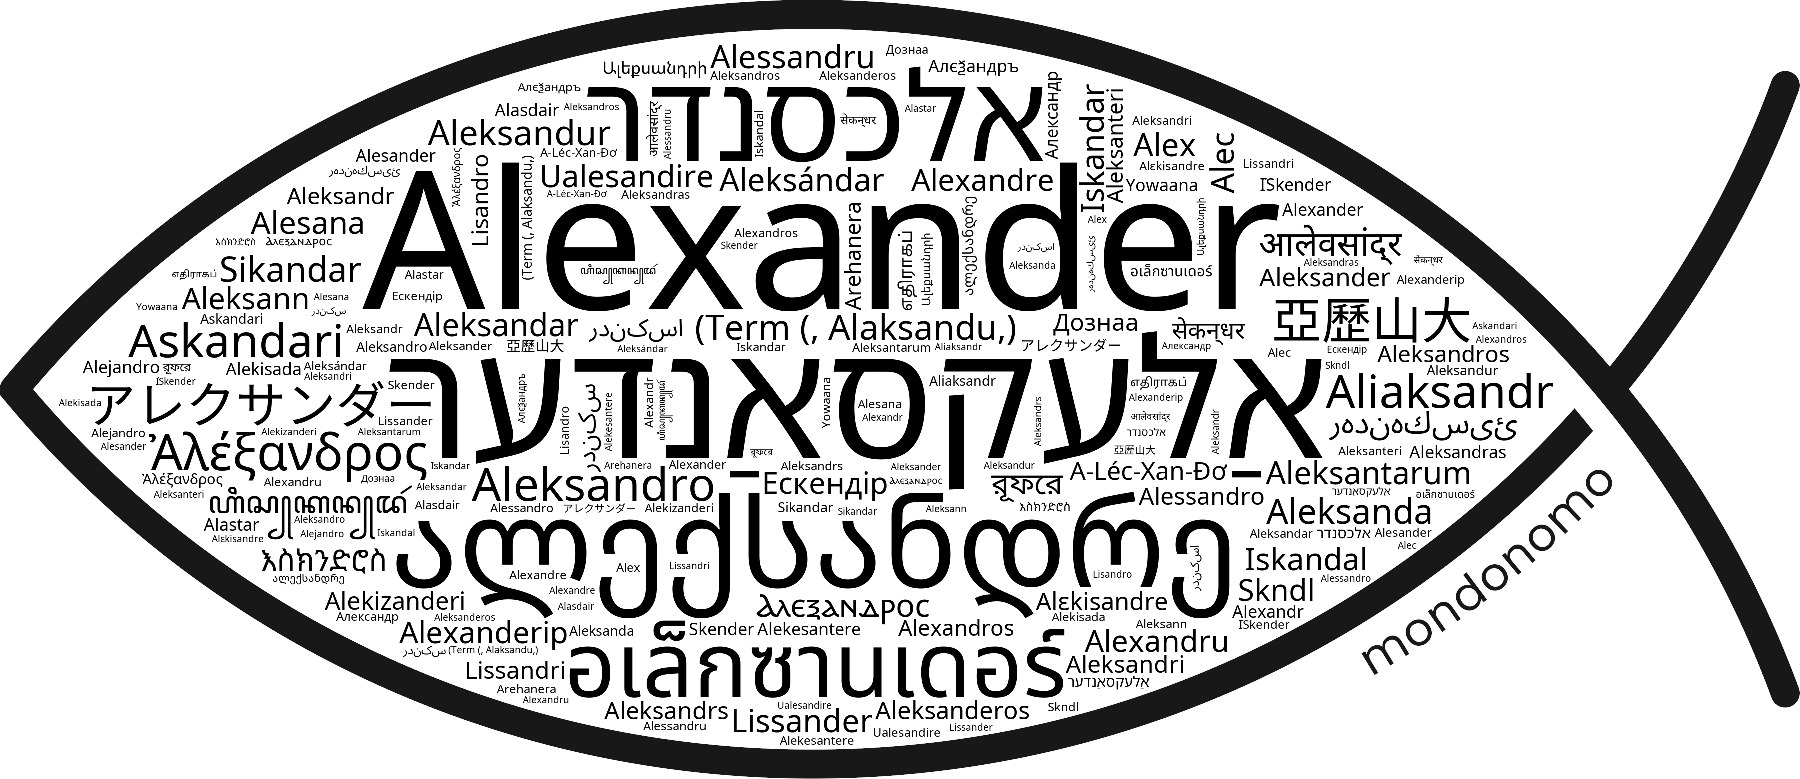 Name Alexander in the world's Bibles